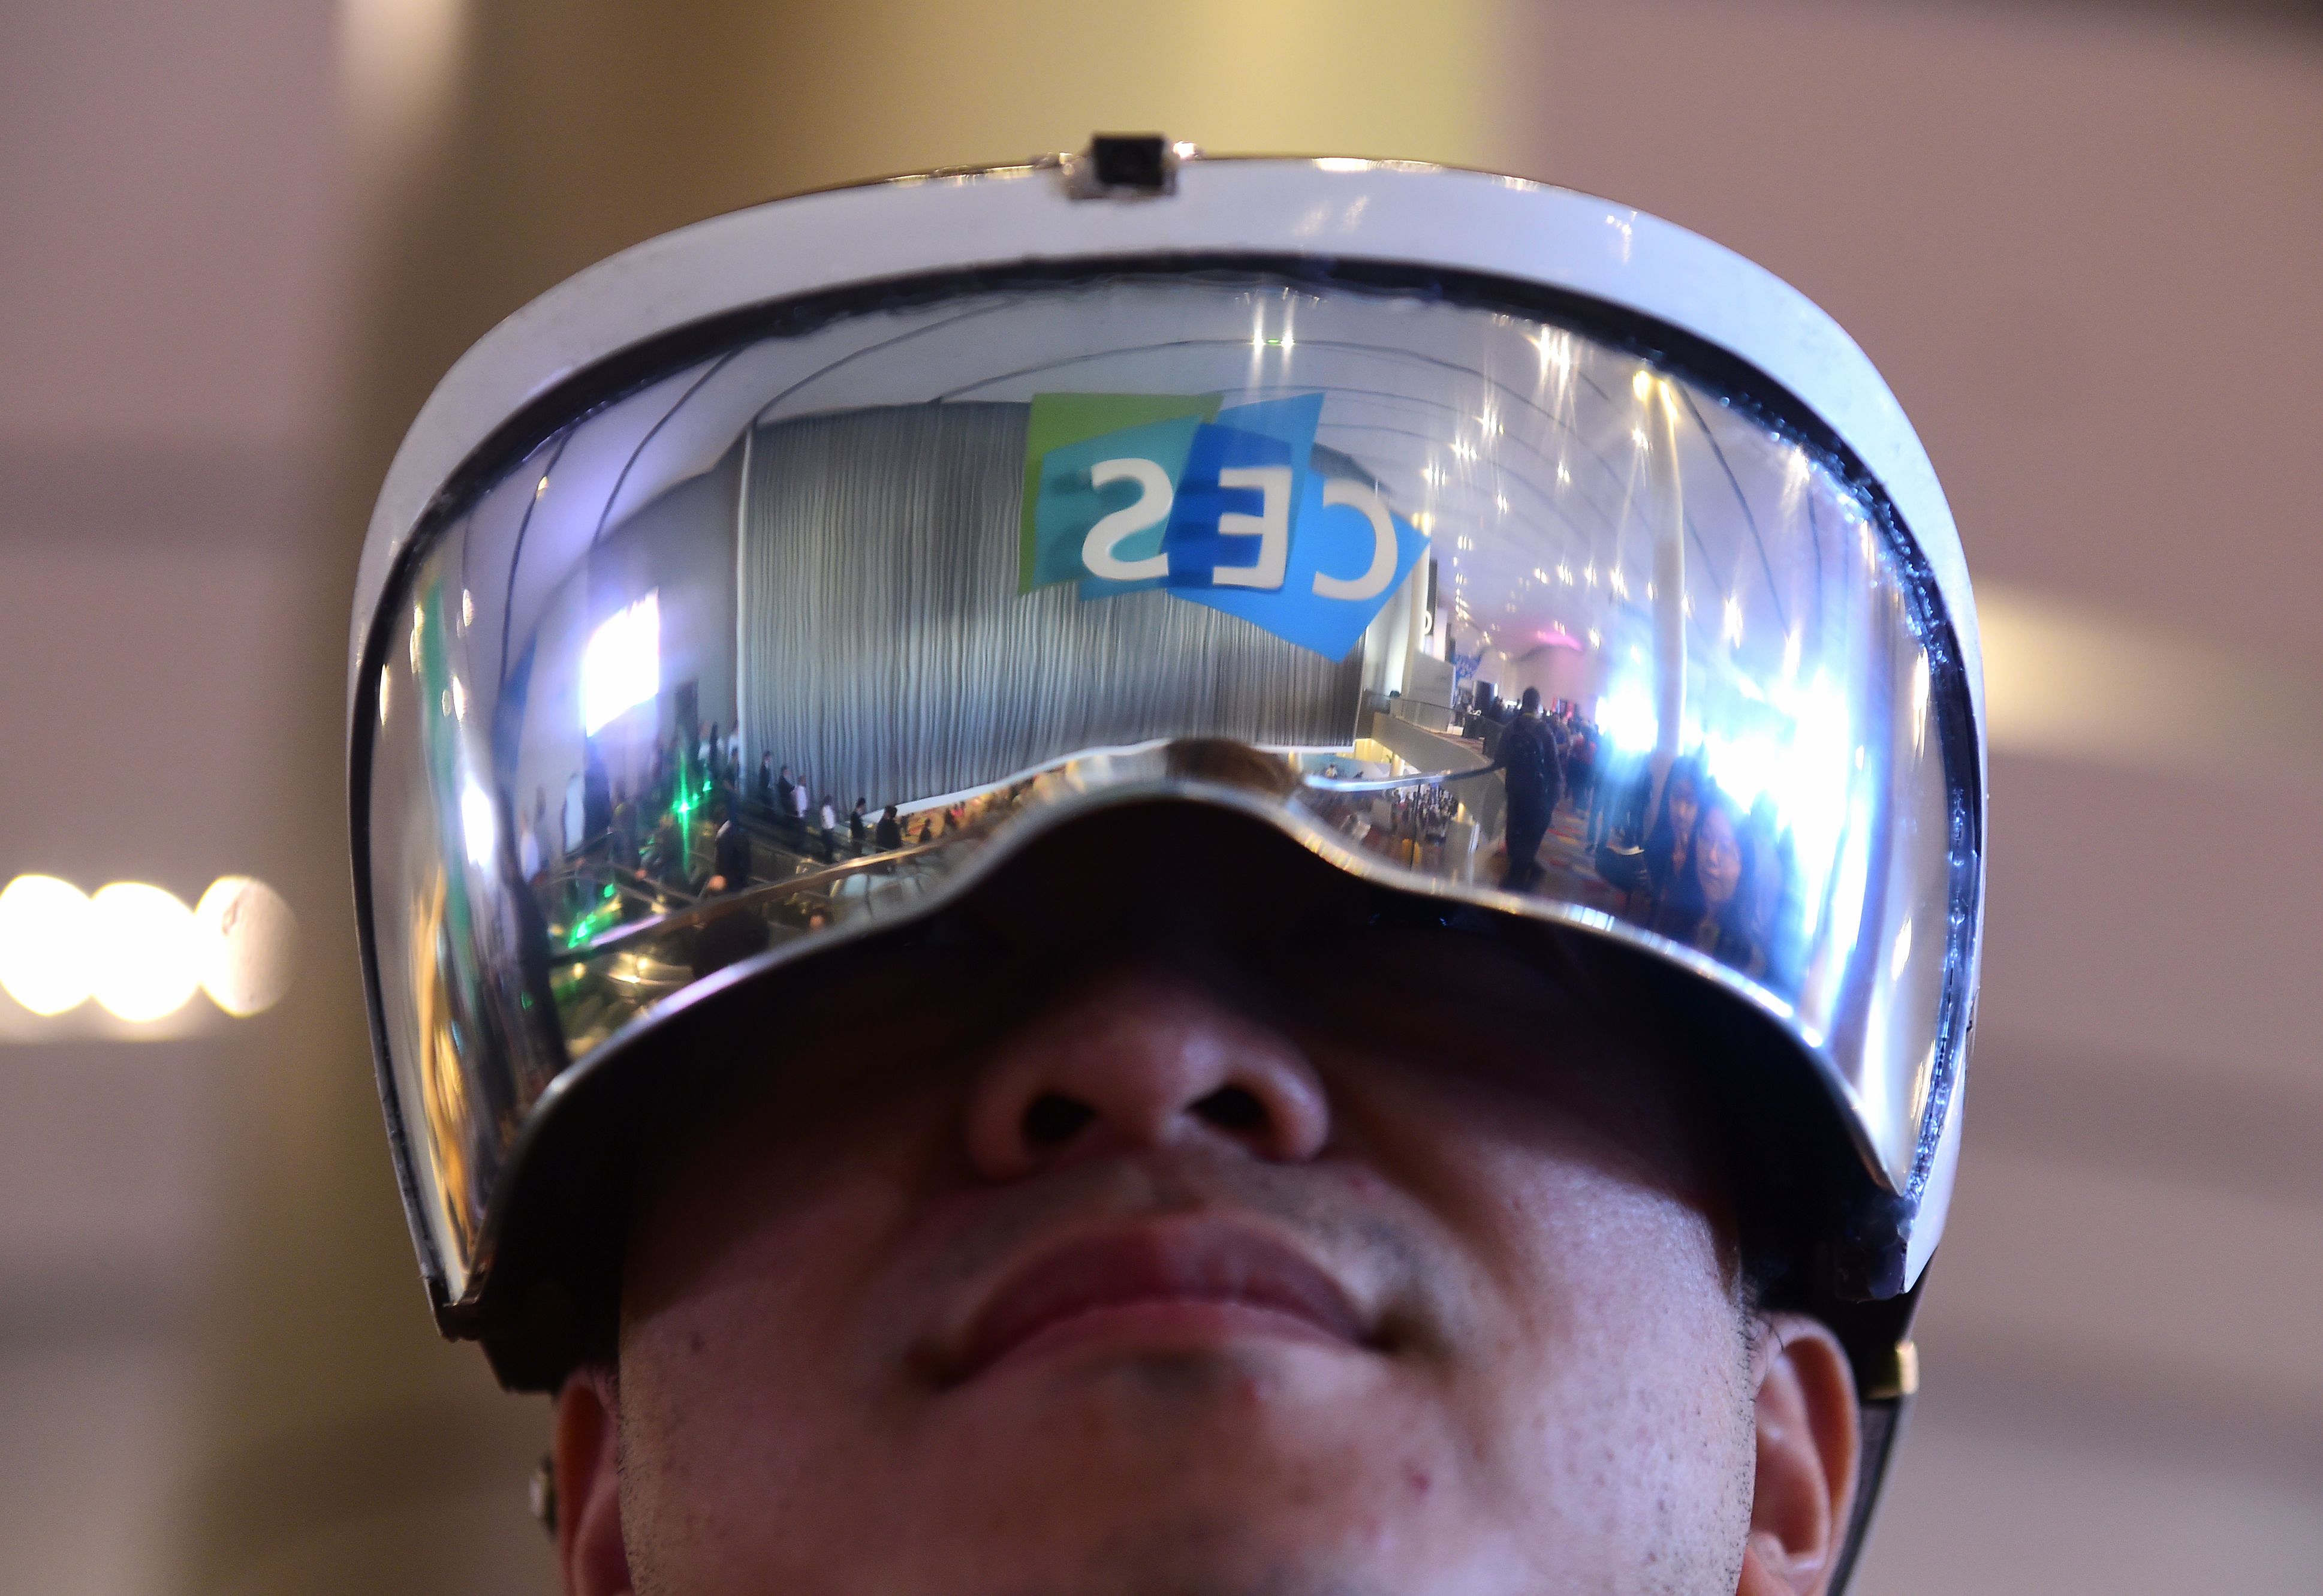 Attendee Wei Rongjie wears a working prototype of his HoloSeer AR/VR all-in-one agumented reality and virtual reality headseat, January 6, 2016 at the CES 2016 Consumer Electronics Show in Las Vegas, Nevada. (Robyn BeckK&mdash;AFP/Getty Images)